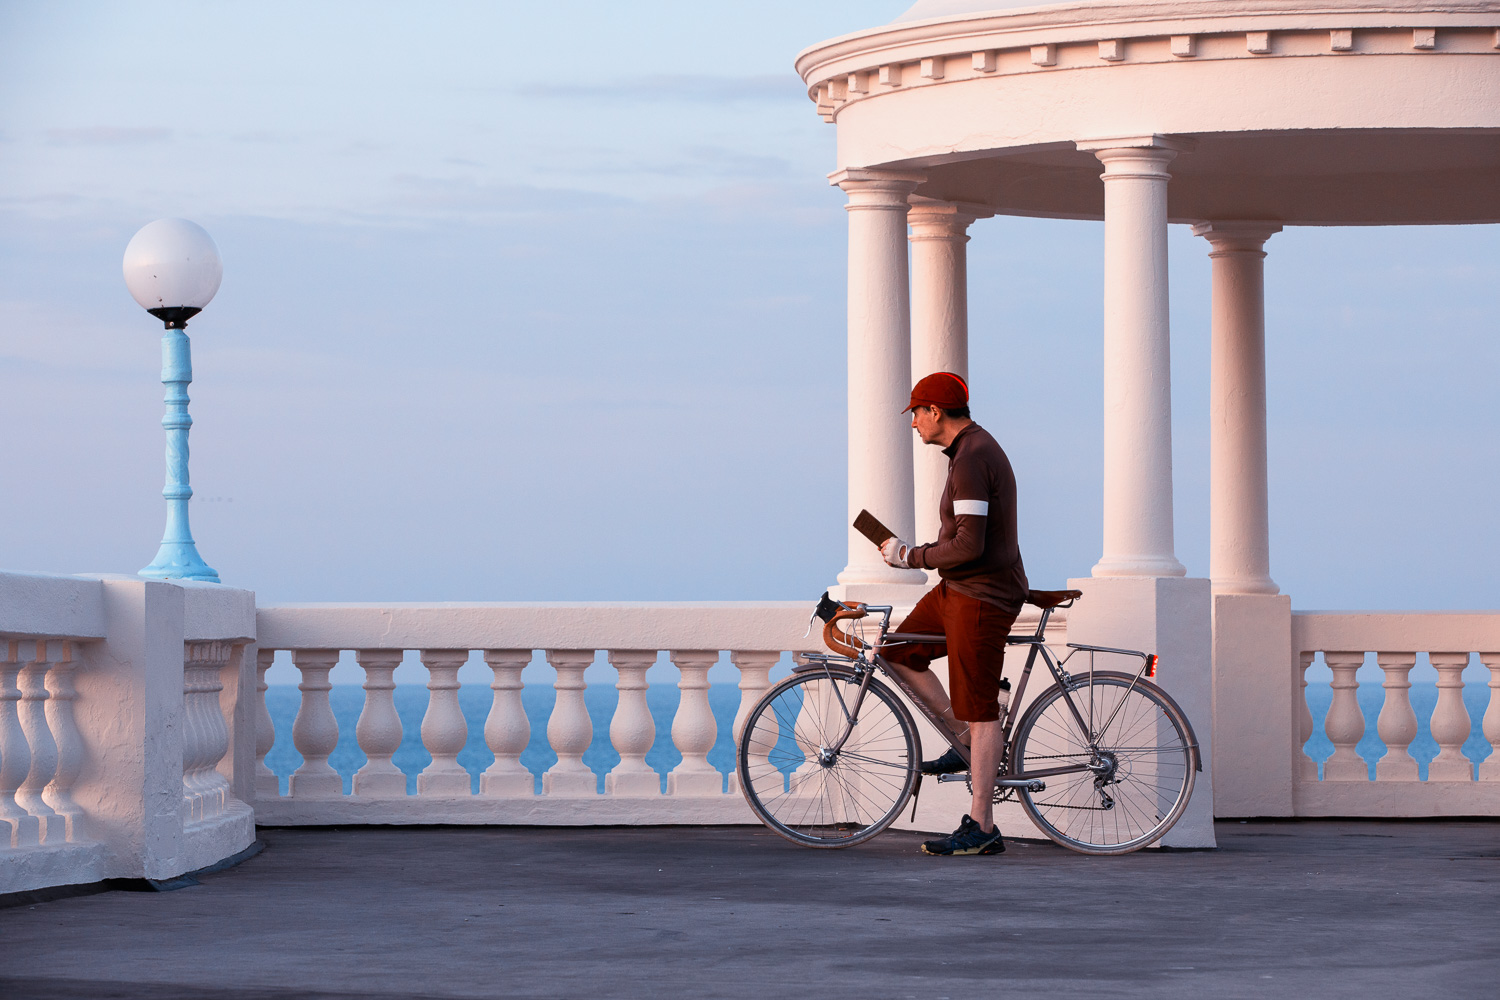 A posed cyclist studies a map in from of Tuscan columns and a classical balustrade at the King George V Colonnade in Bexhill-on-Sea